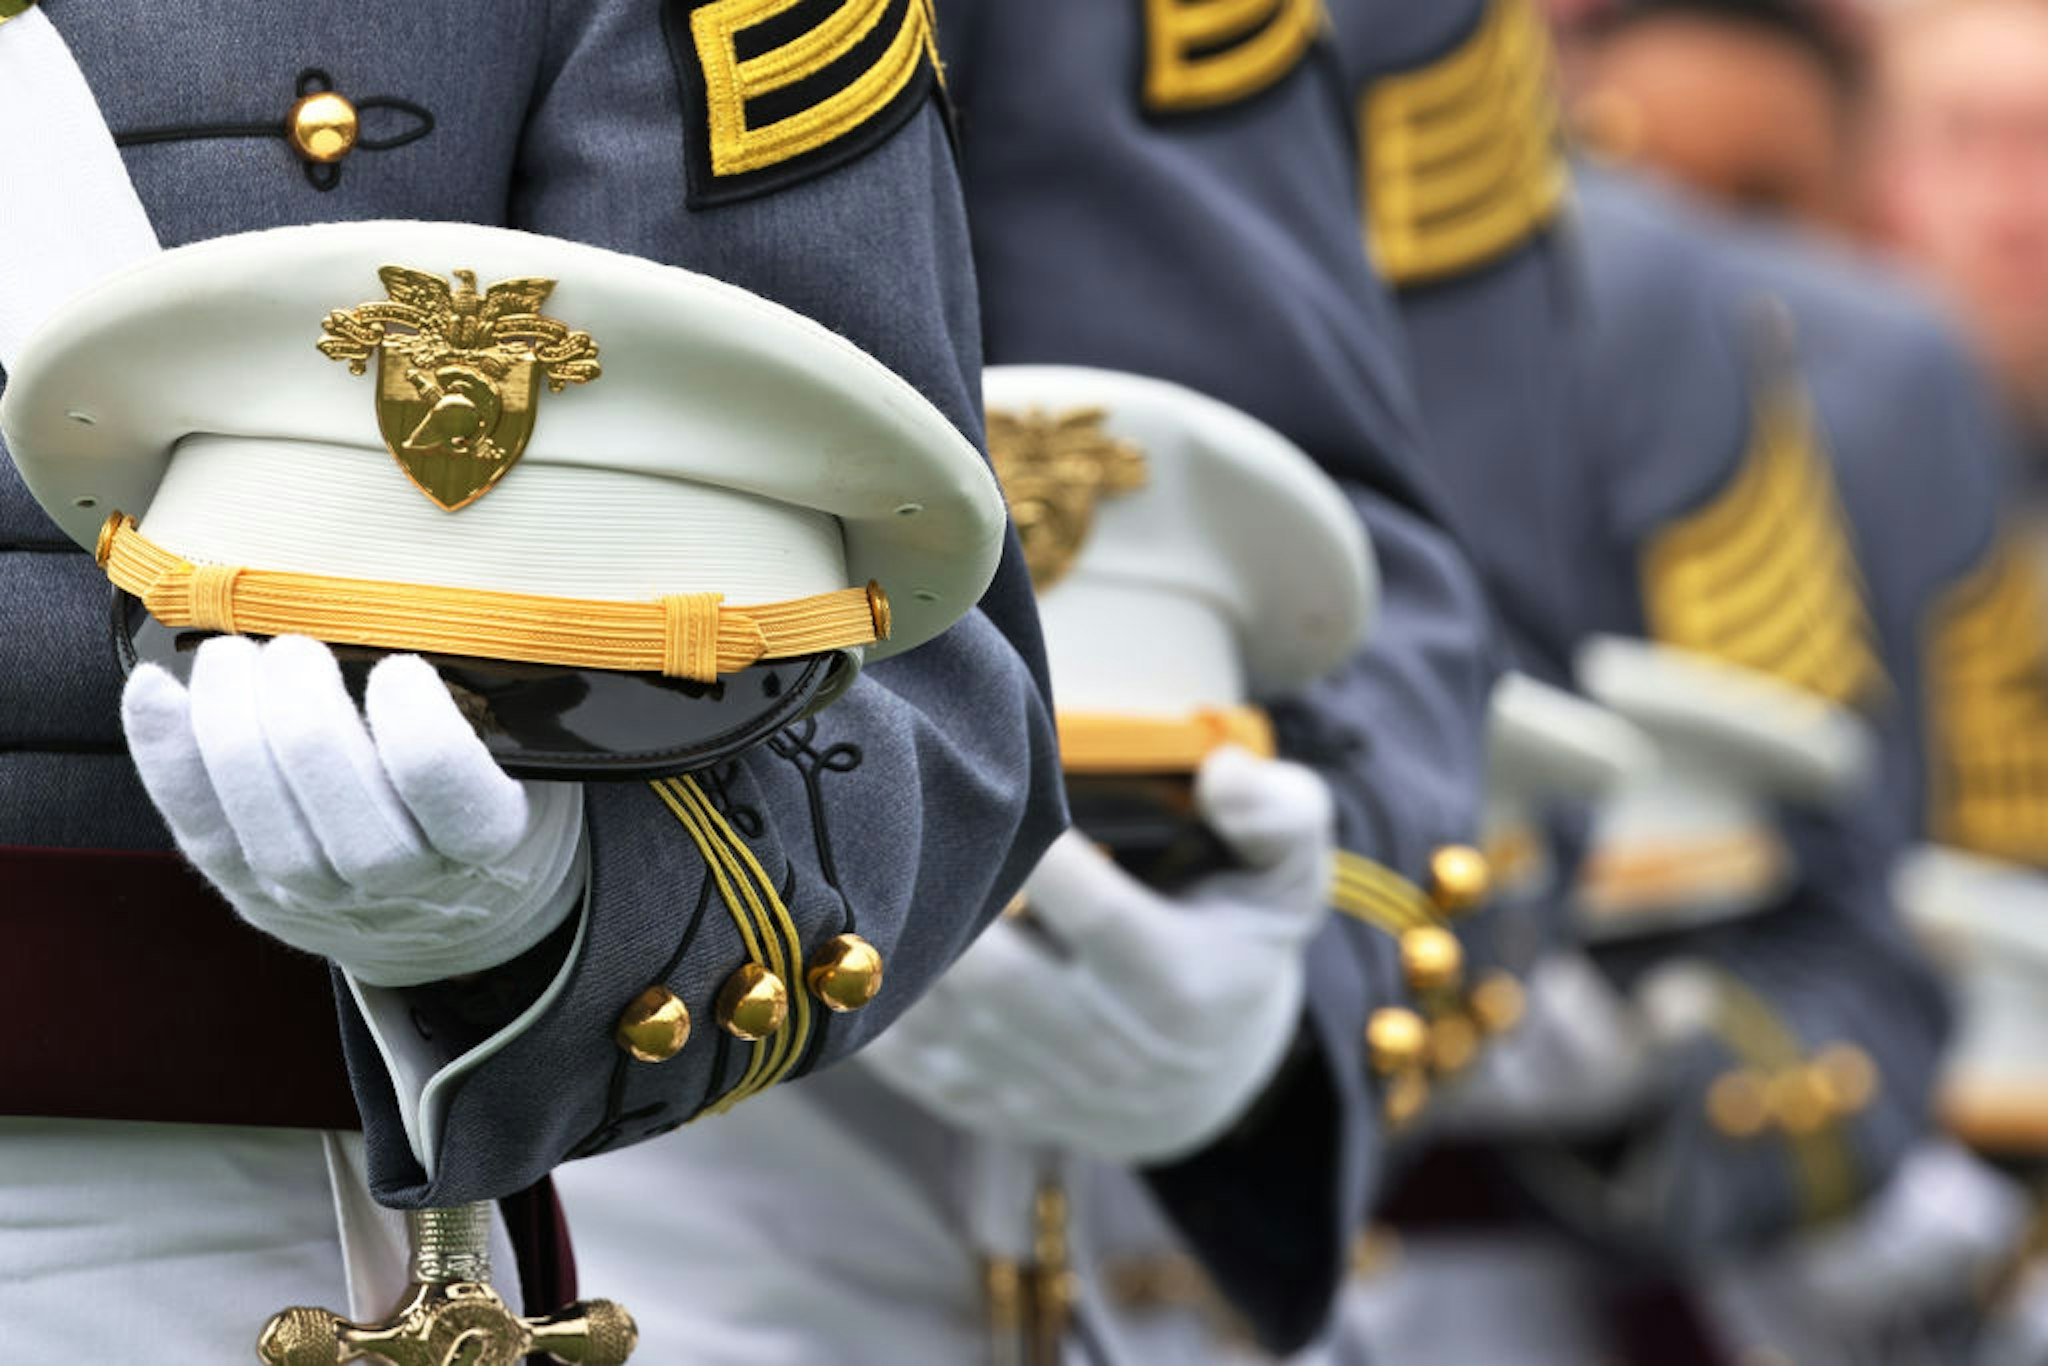 WEST POINT, NEW YORK - MAY 22: West Point graduates stand as the Army Song is played during the 2021 West Point Commencement Ceremony on May 22, 2021 in West Point, New York. U.S. Secretary of Defense Lloyd Austin returned to his alma mater to deliver the U.S. Military Academy’s Class of 2021 commencement address. There are 995 cadets in this years graduation class.